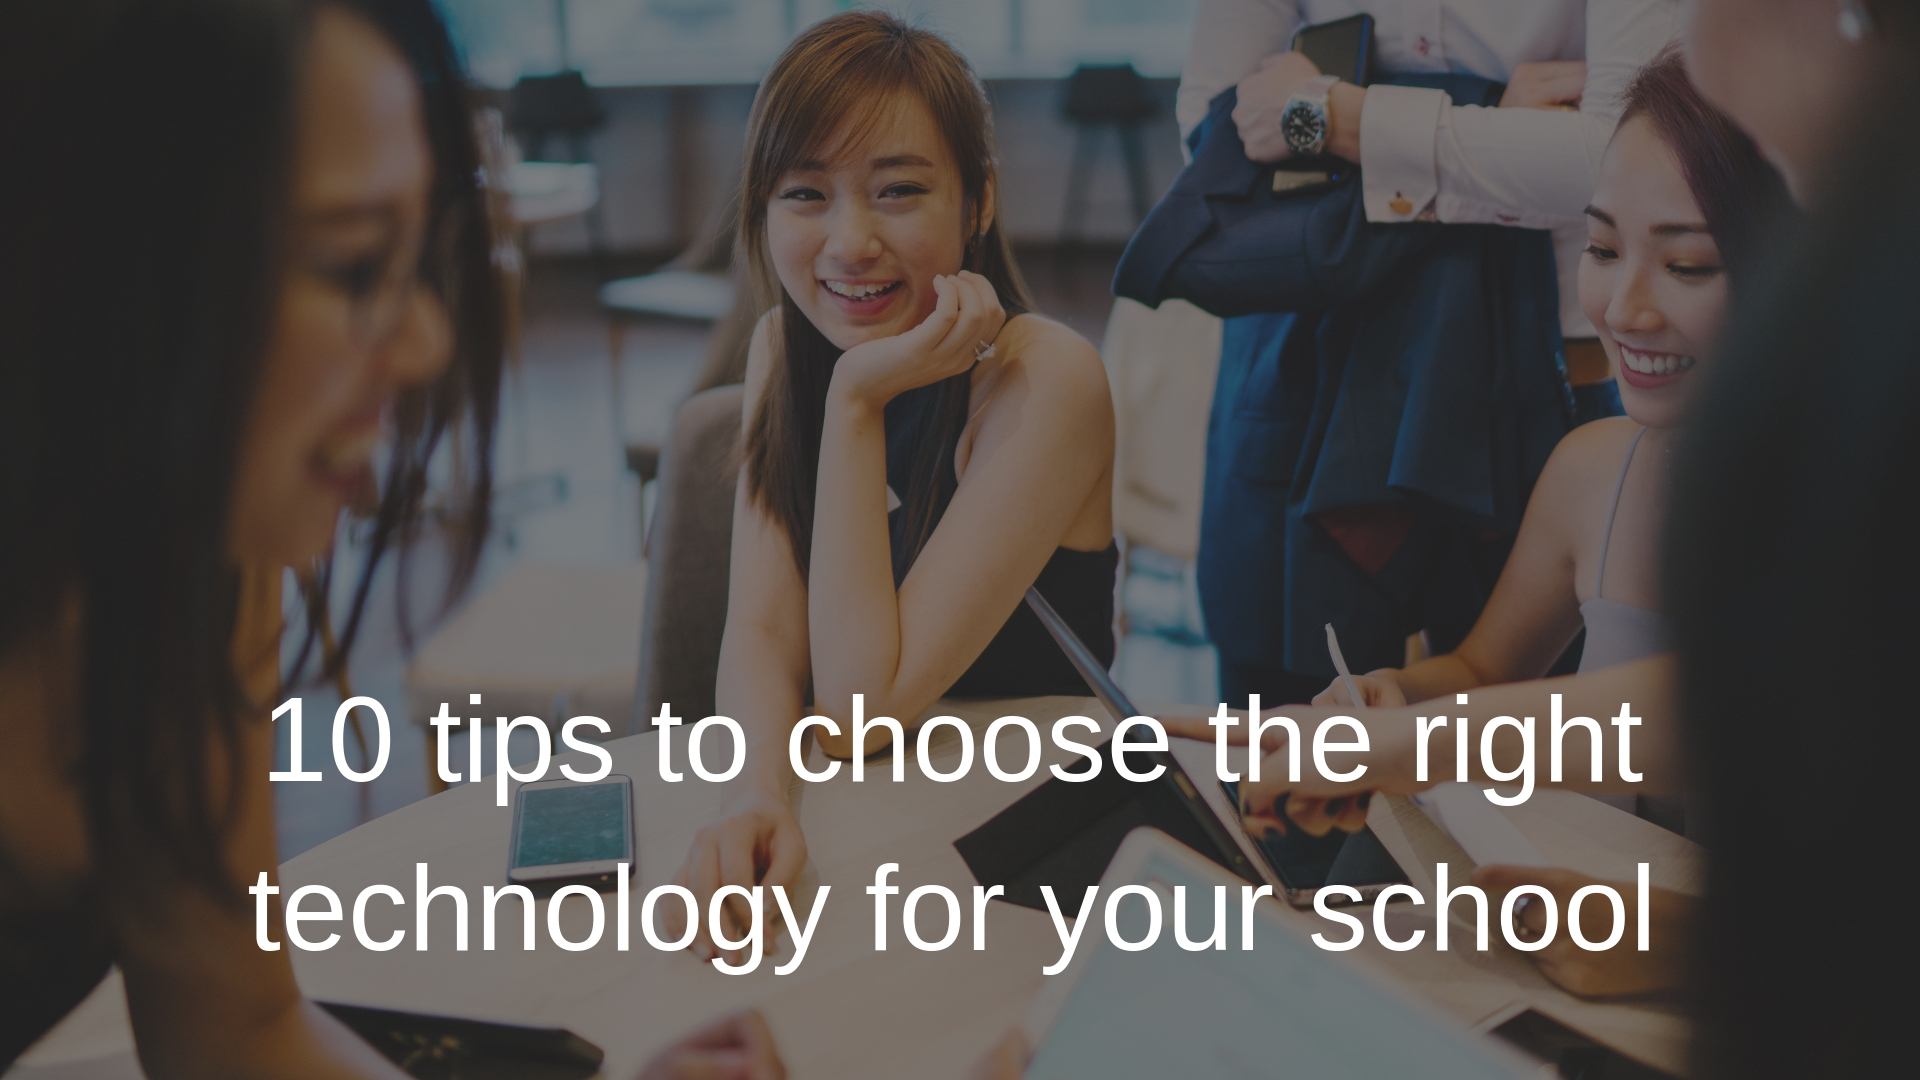 10 tips to choose the right technology for your school